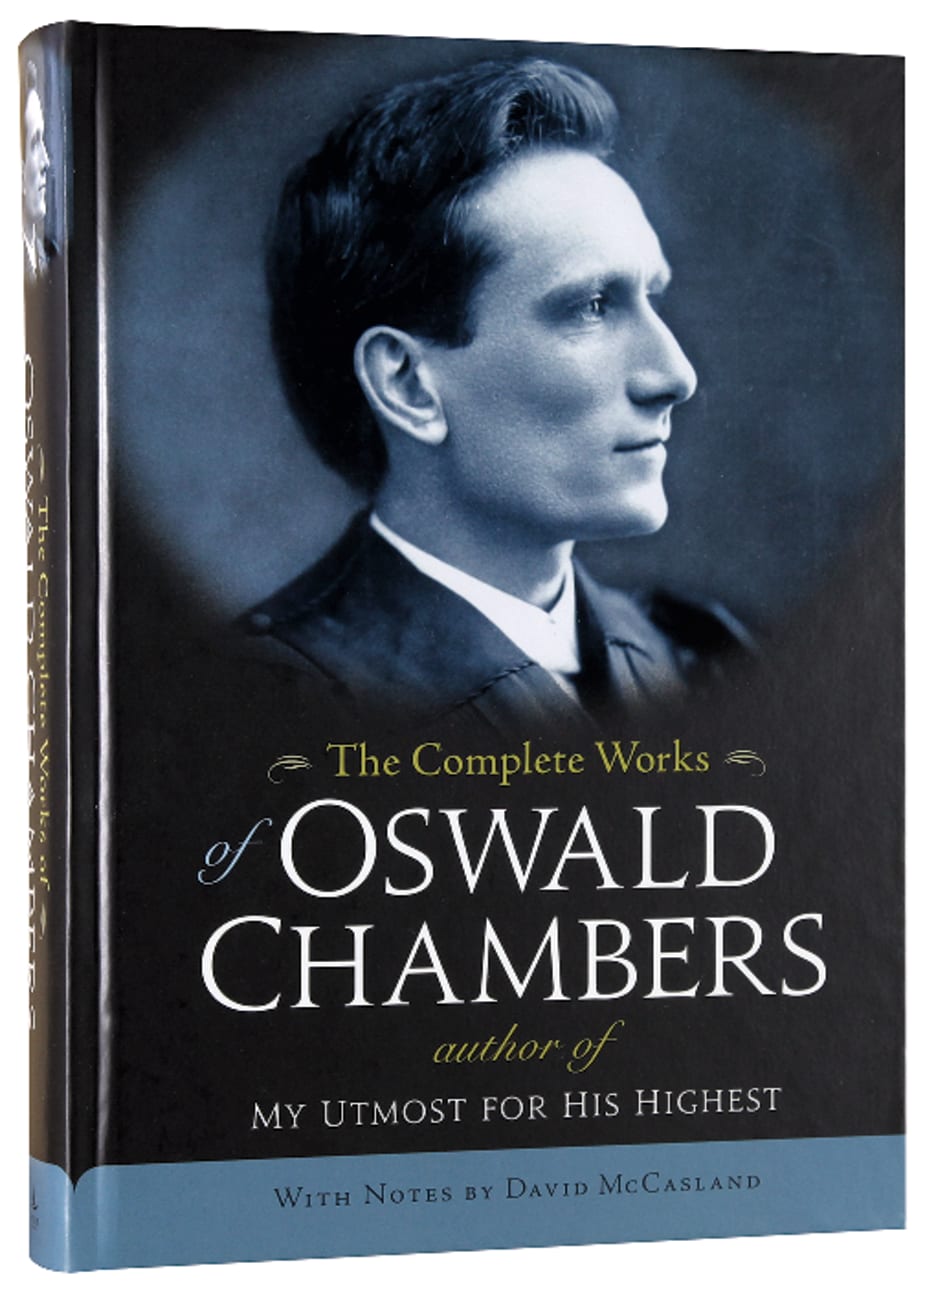 The Complete Works of Oswald Chambers Hardback